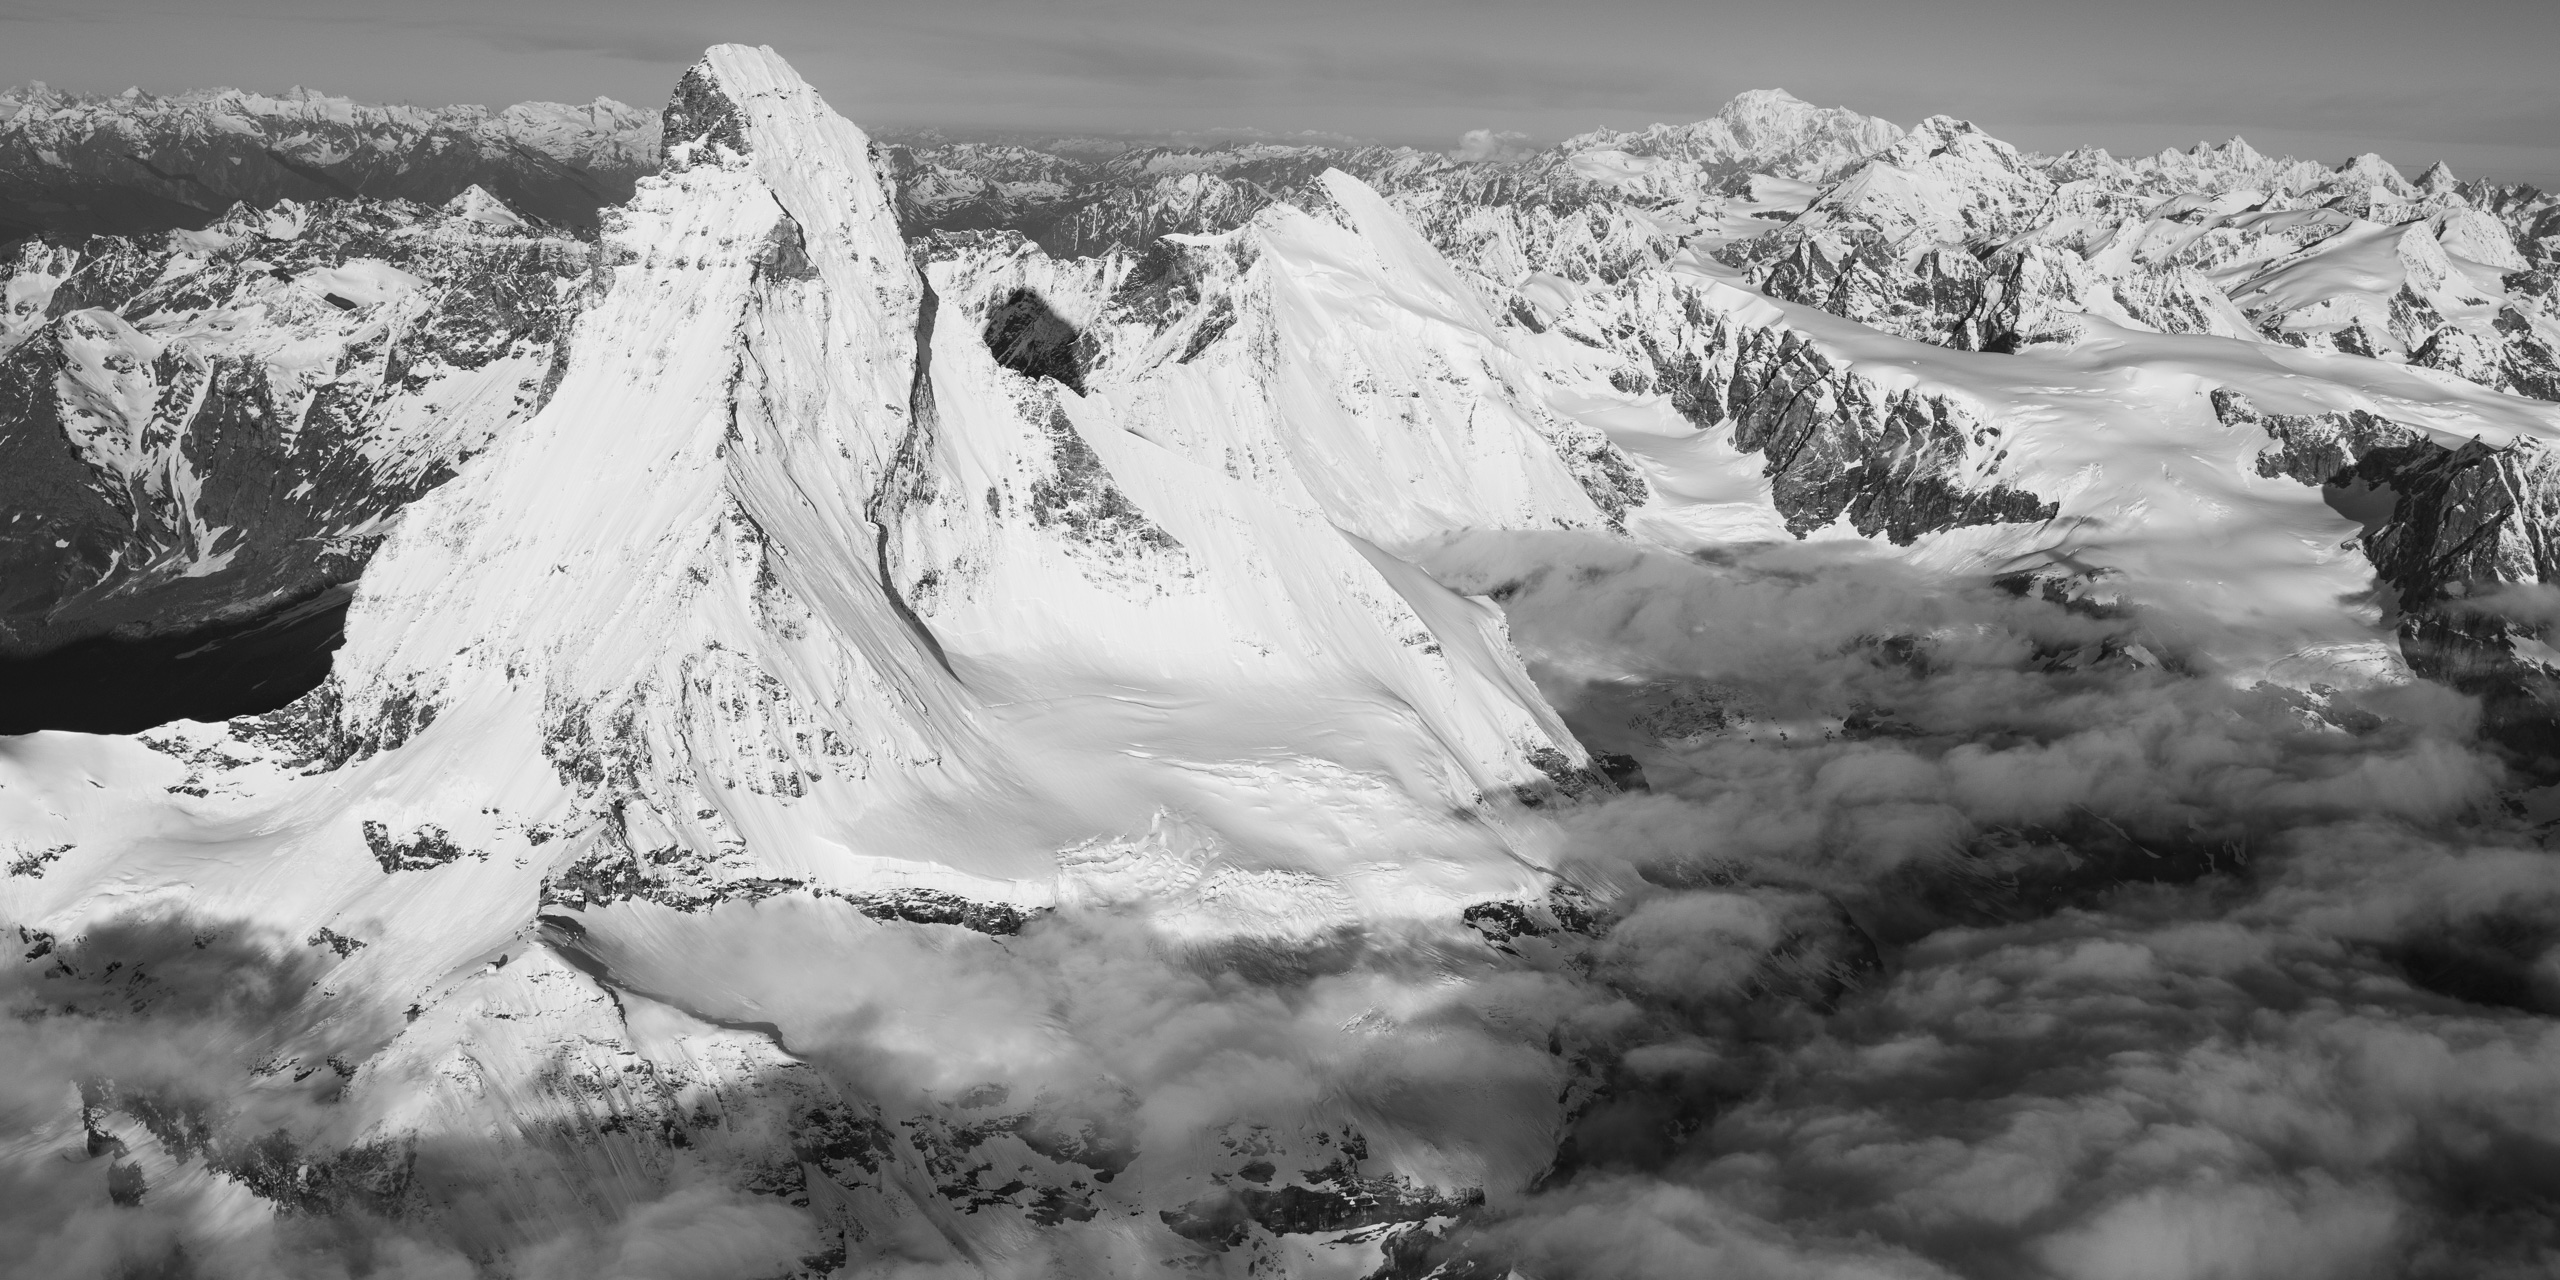 Panoramic mont blanc - Photo painting of a mountain landscape from the Matterhorn to Mont-Blanc